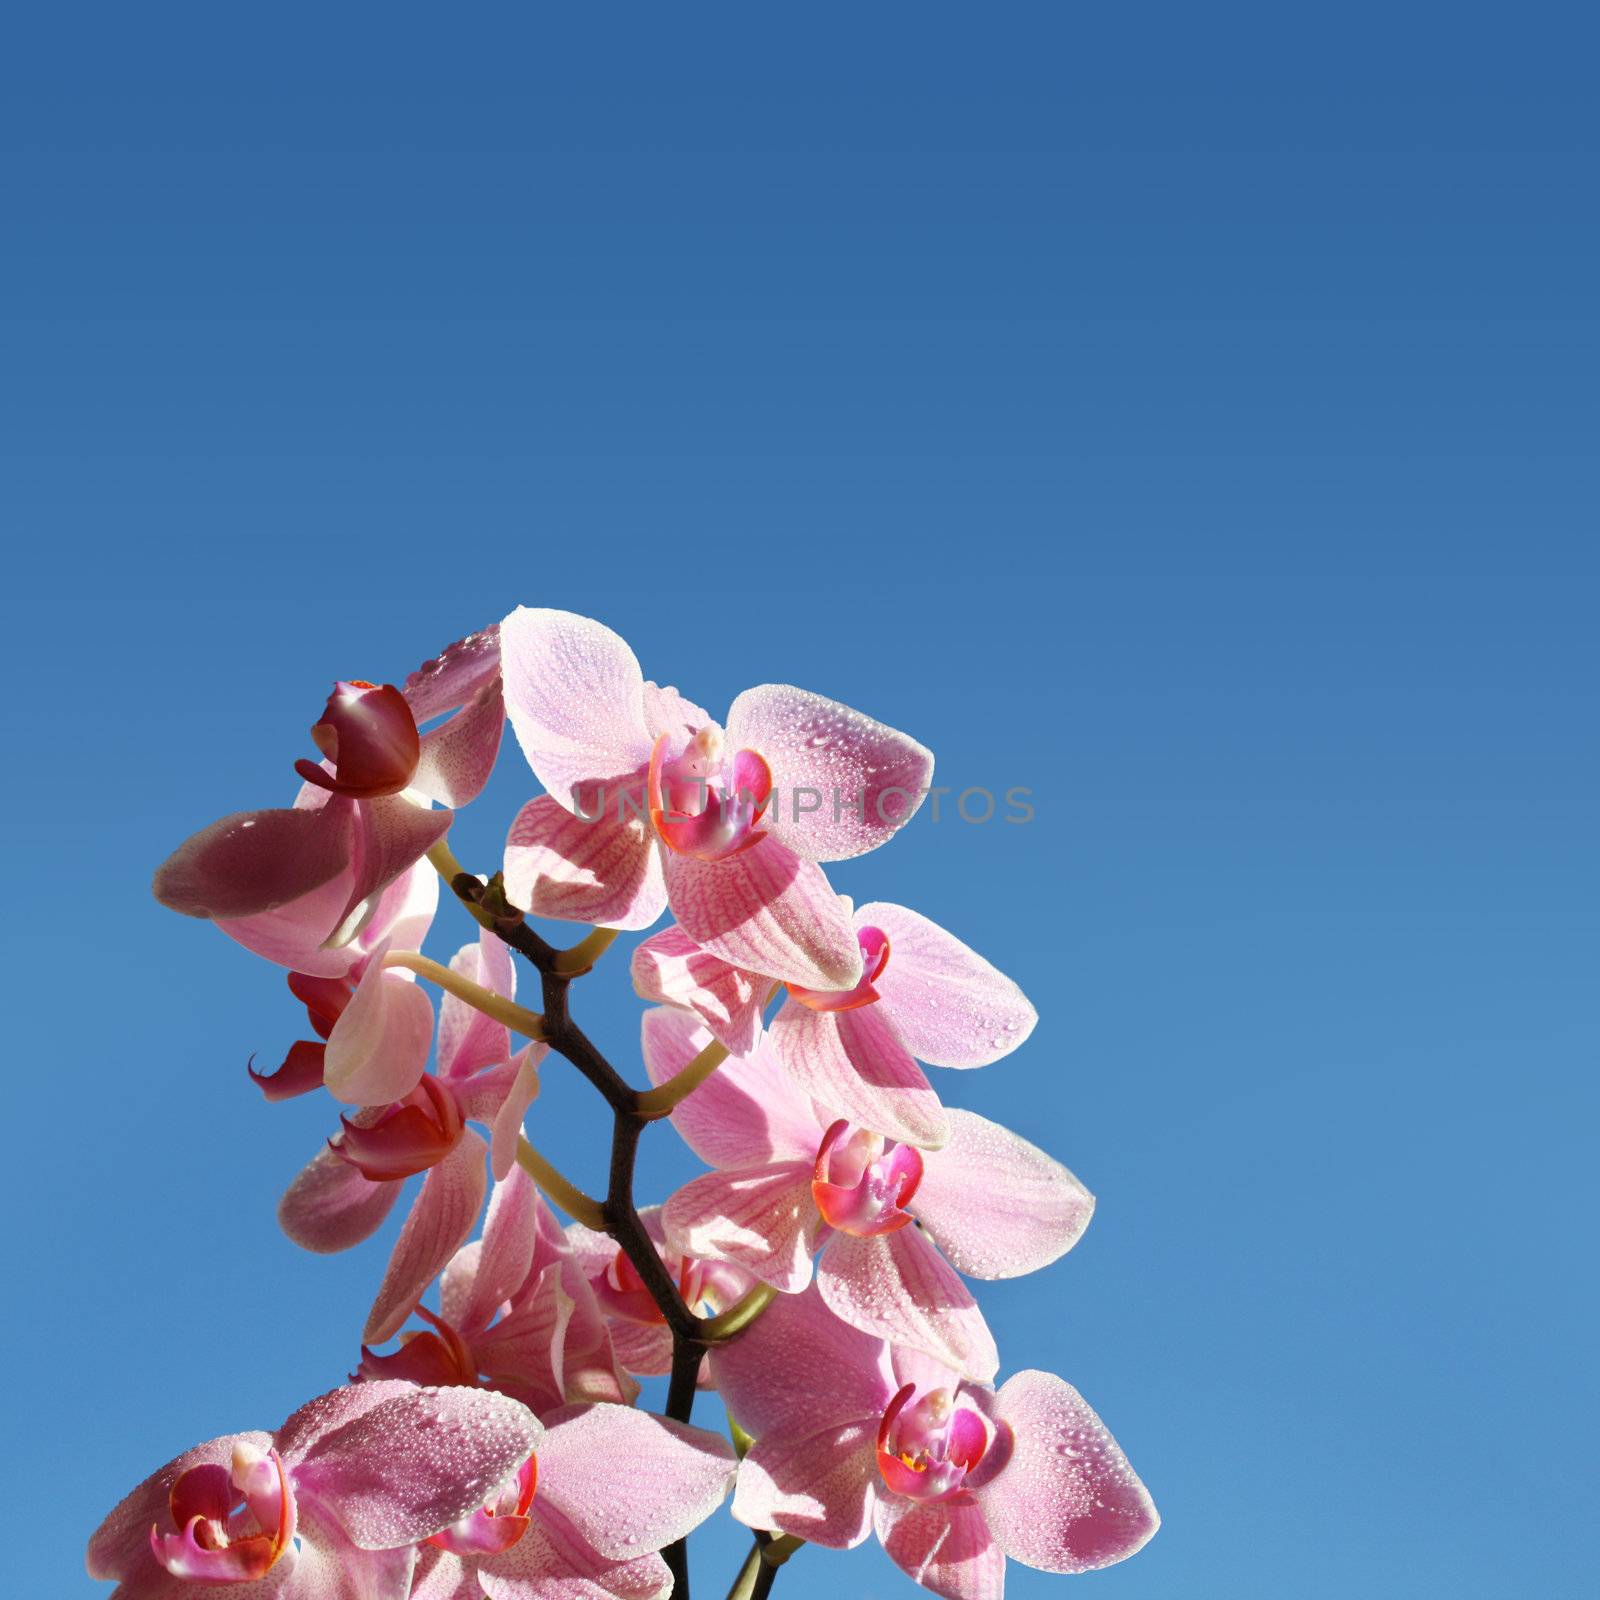 Orchids in the sky  by photochecker